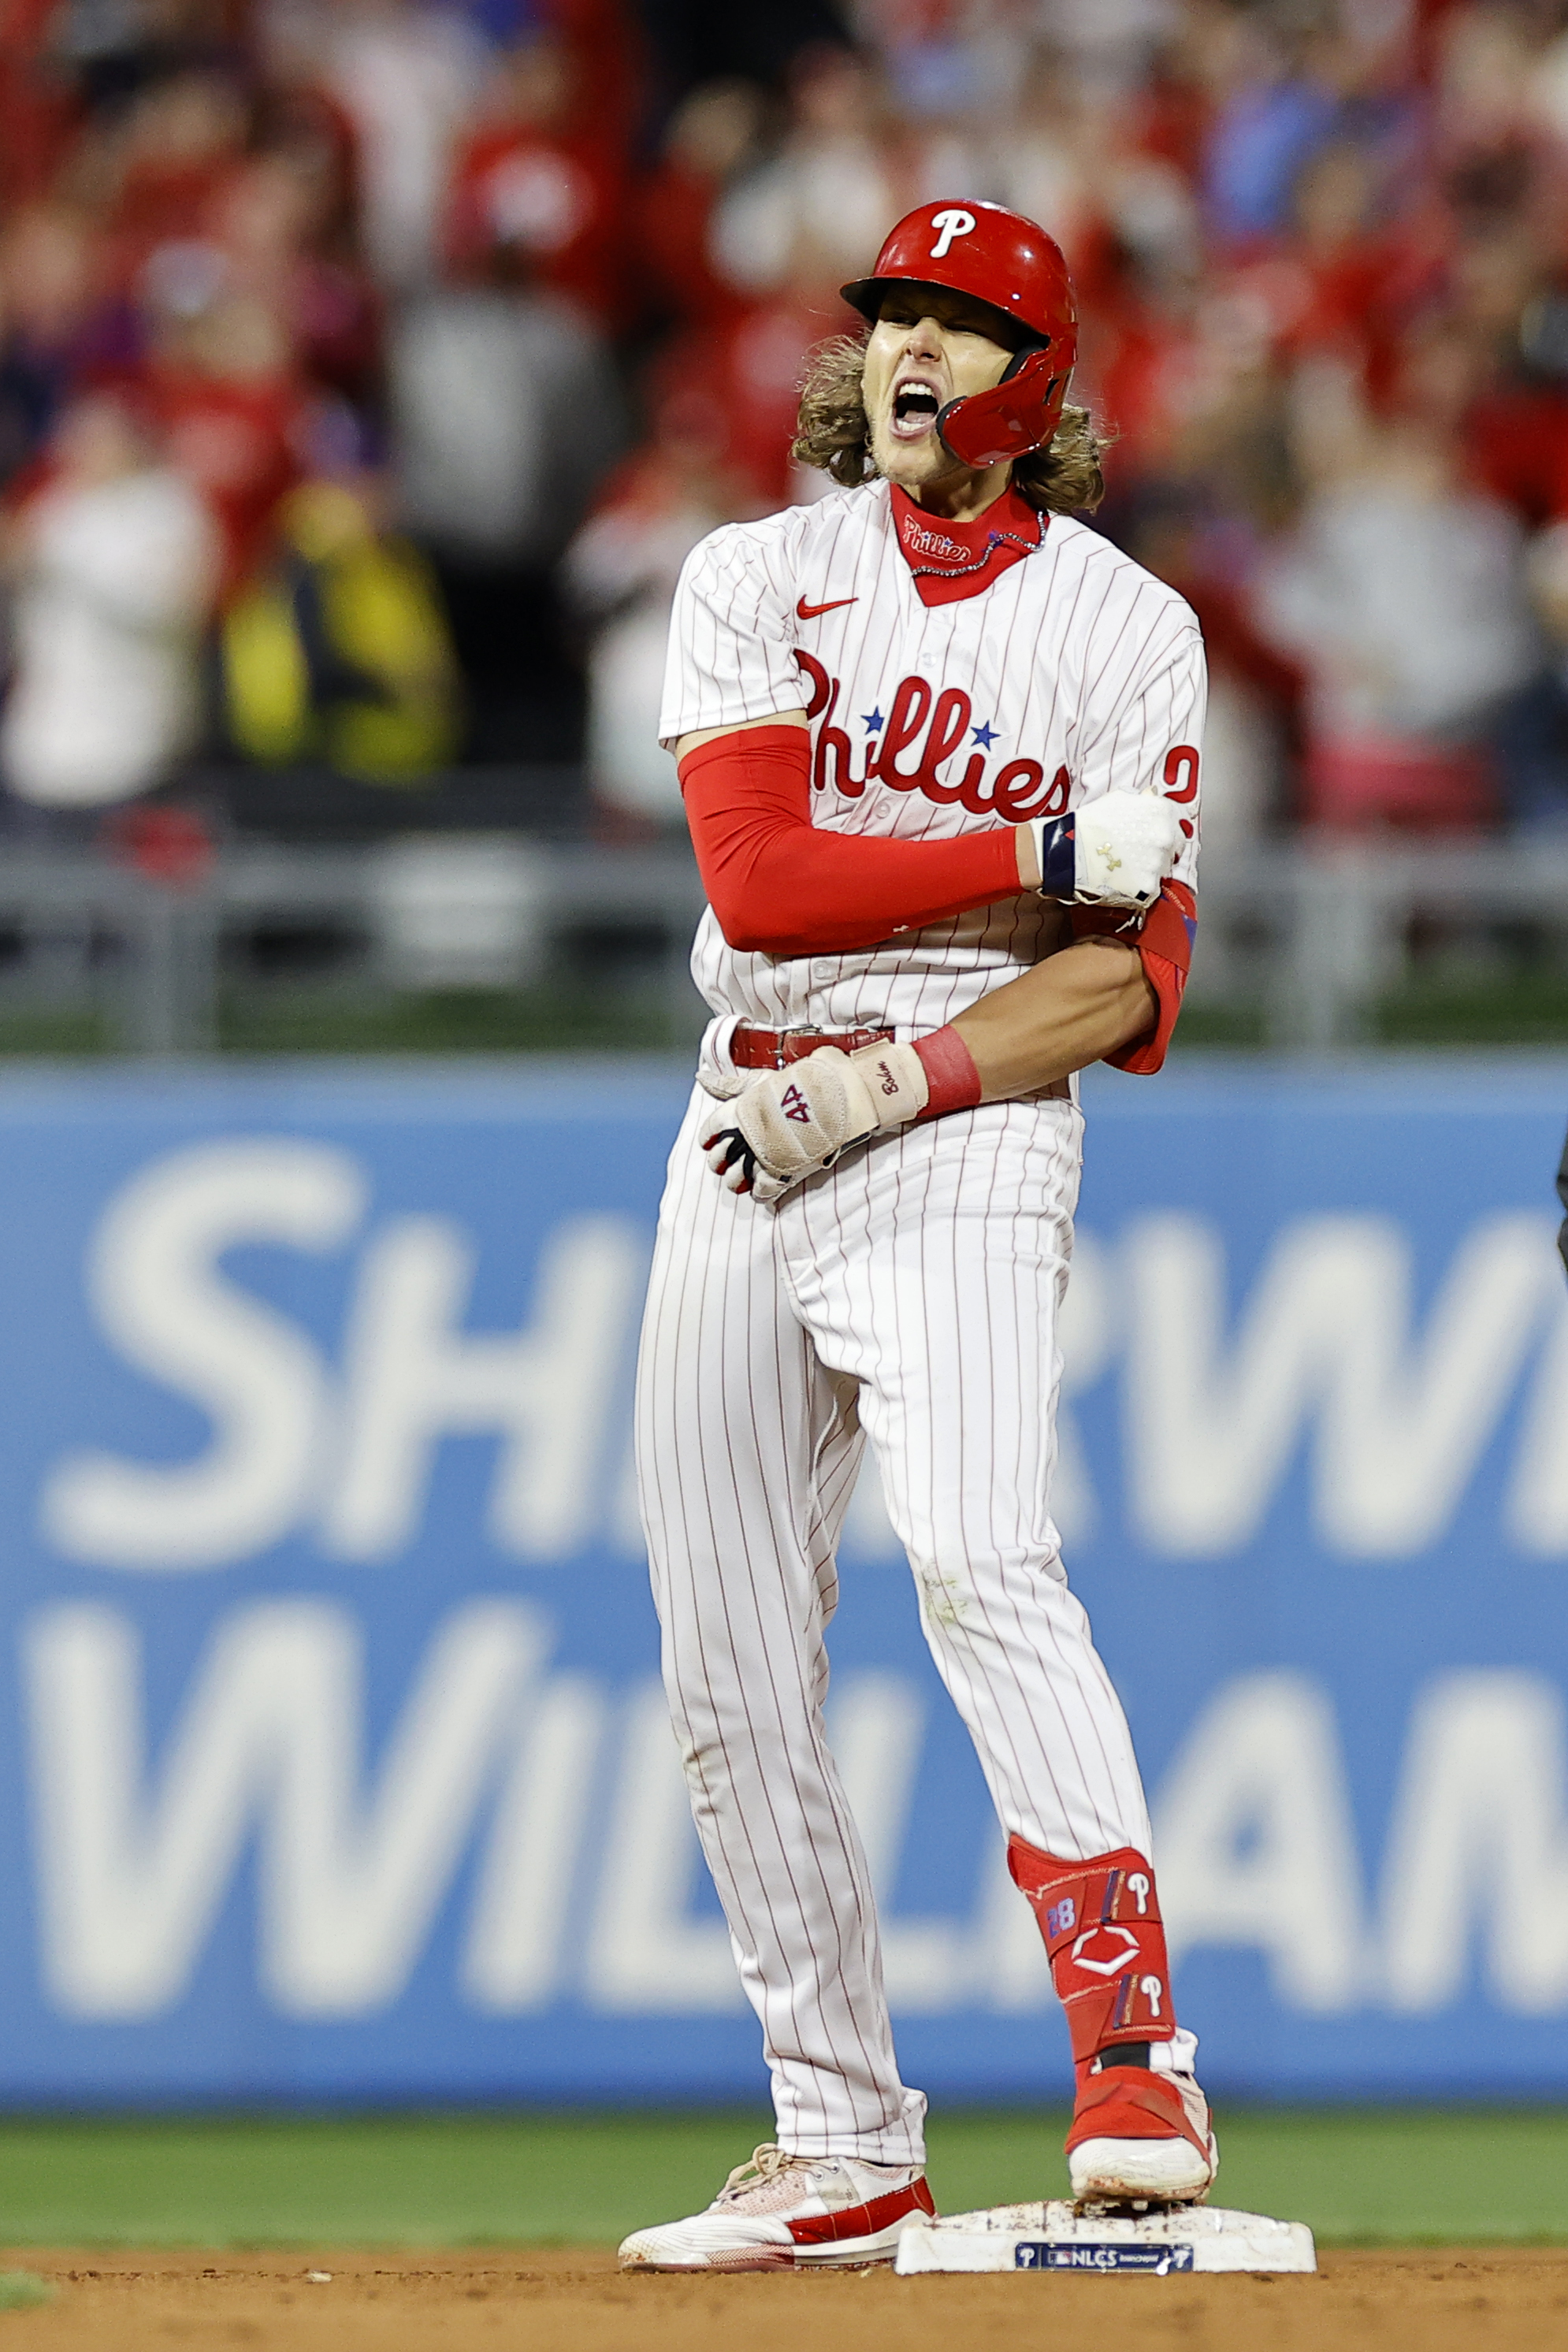 NLCS: Jean Segura and Phillies Beat Padres in Game 3 - The New York Times